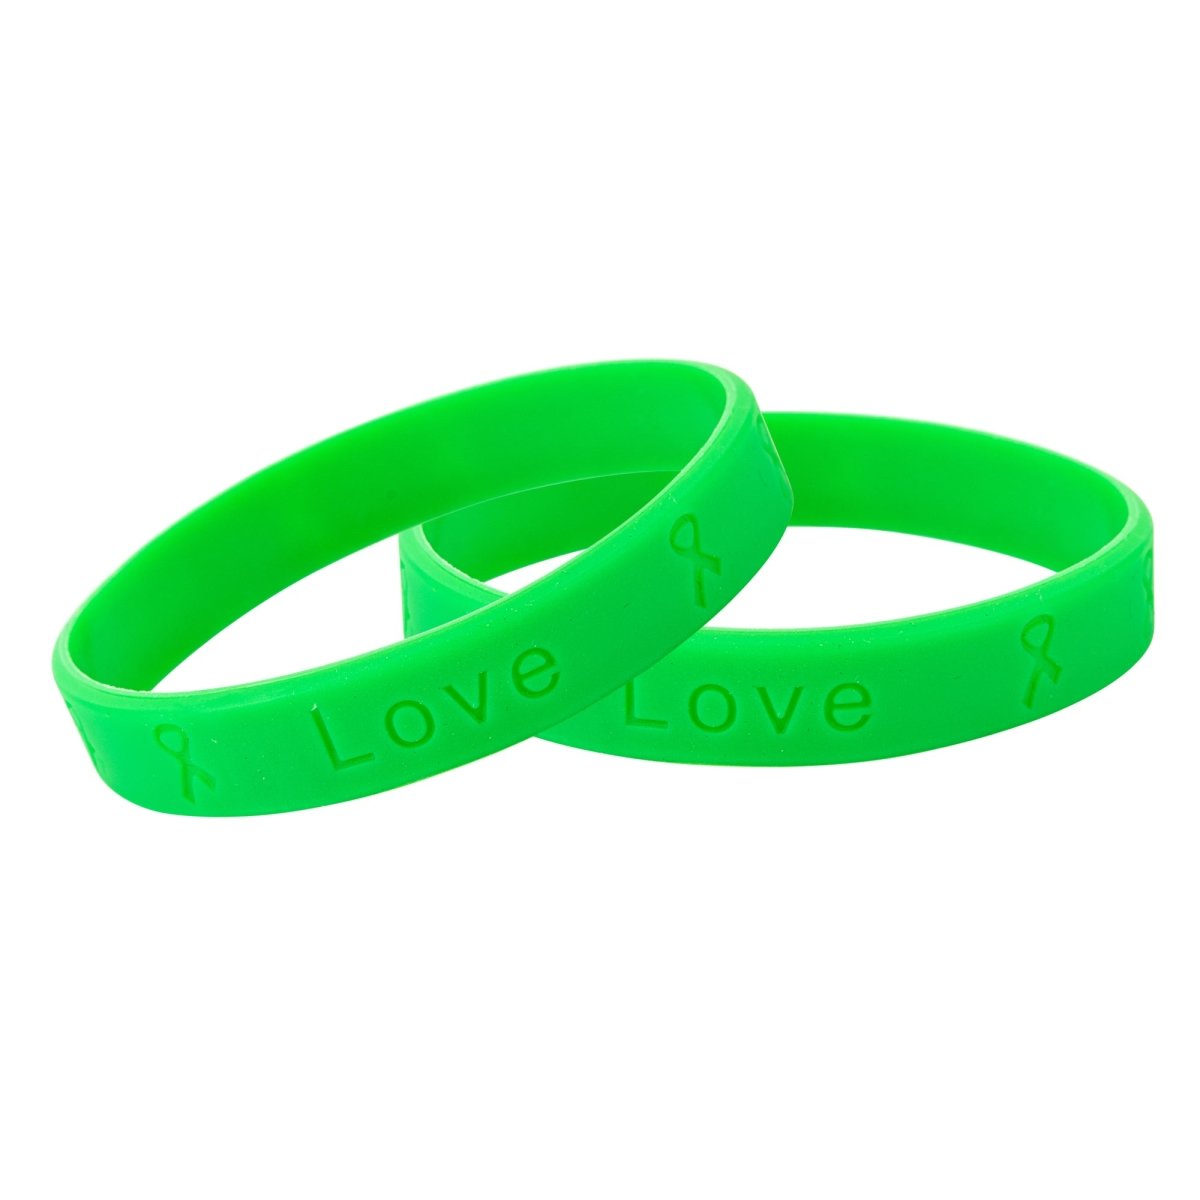 Child Sized Mental Health Awareness Green Silicone Bracelet Wristbands - Fundraising For A Cause